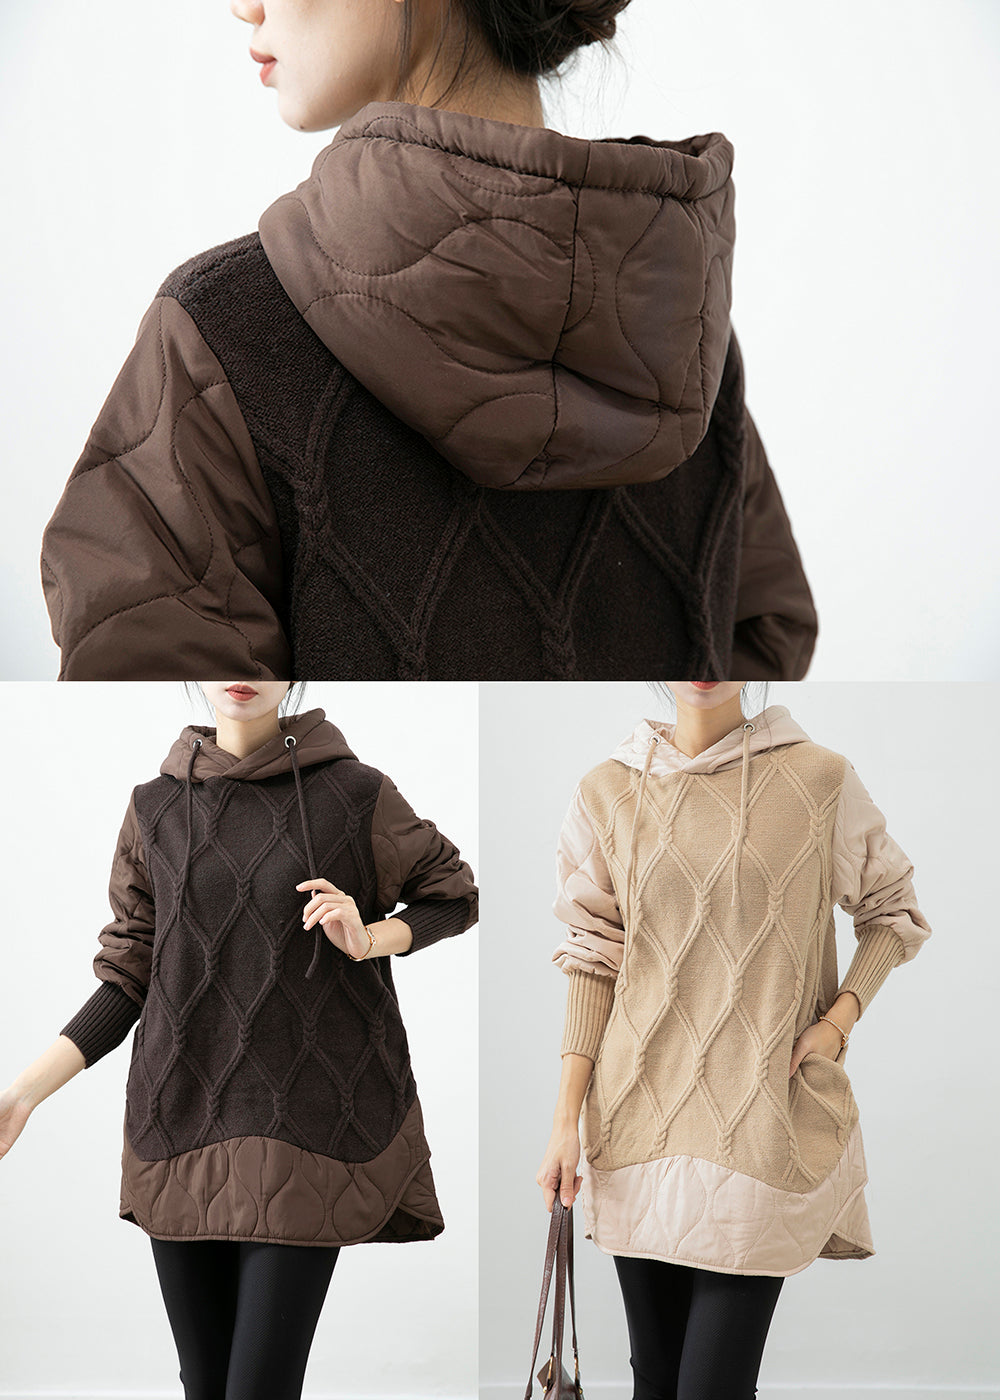 Chocolate Patchwork Knit Fine Cotton Filled Pullover Streetwear Dress Hooded Winter